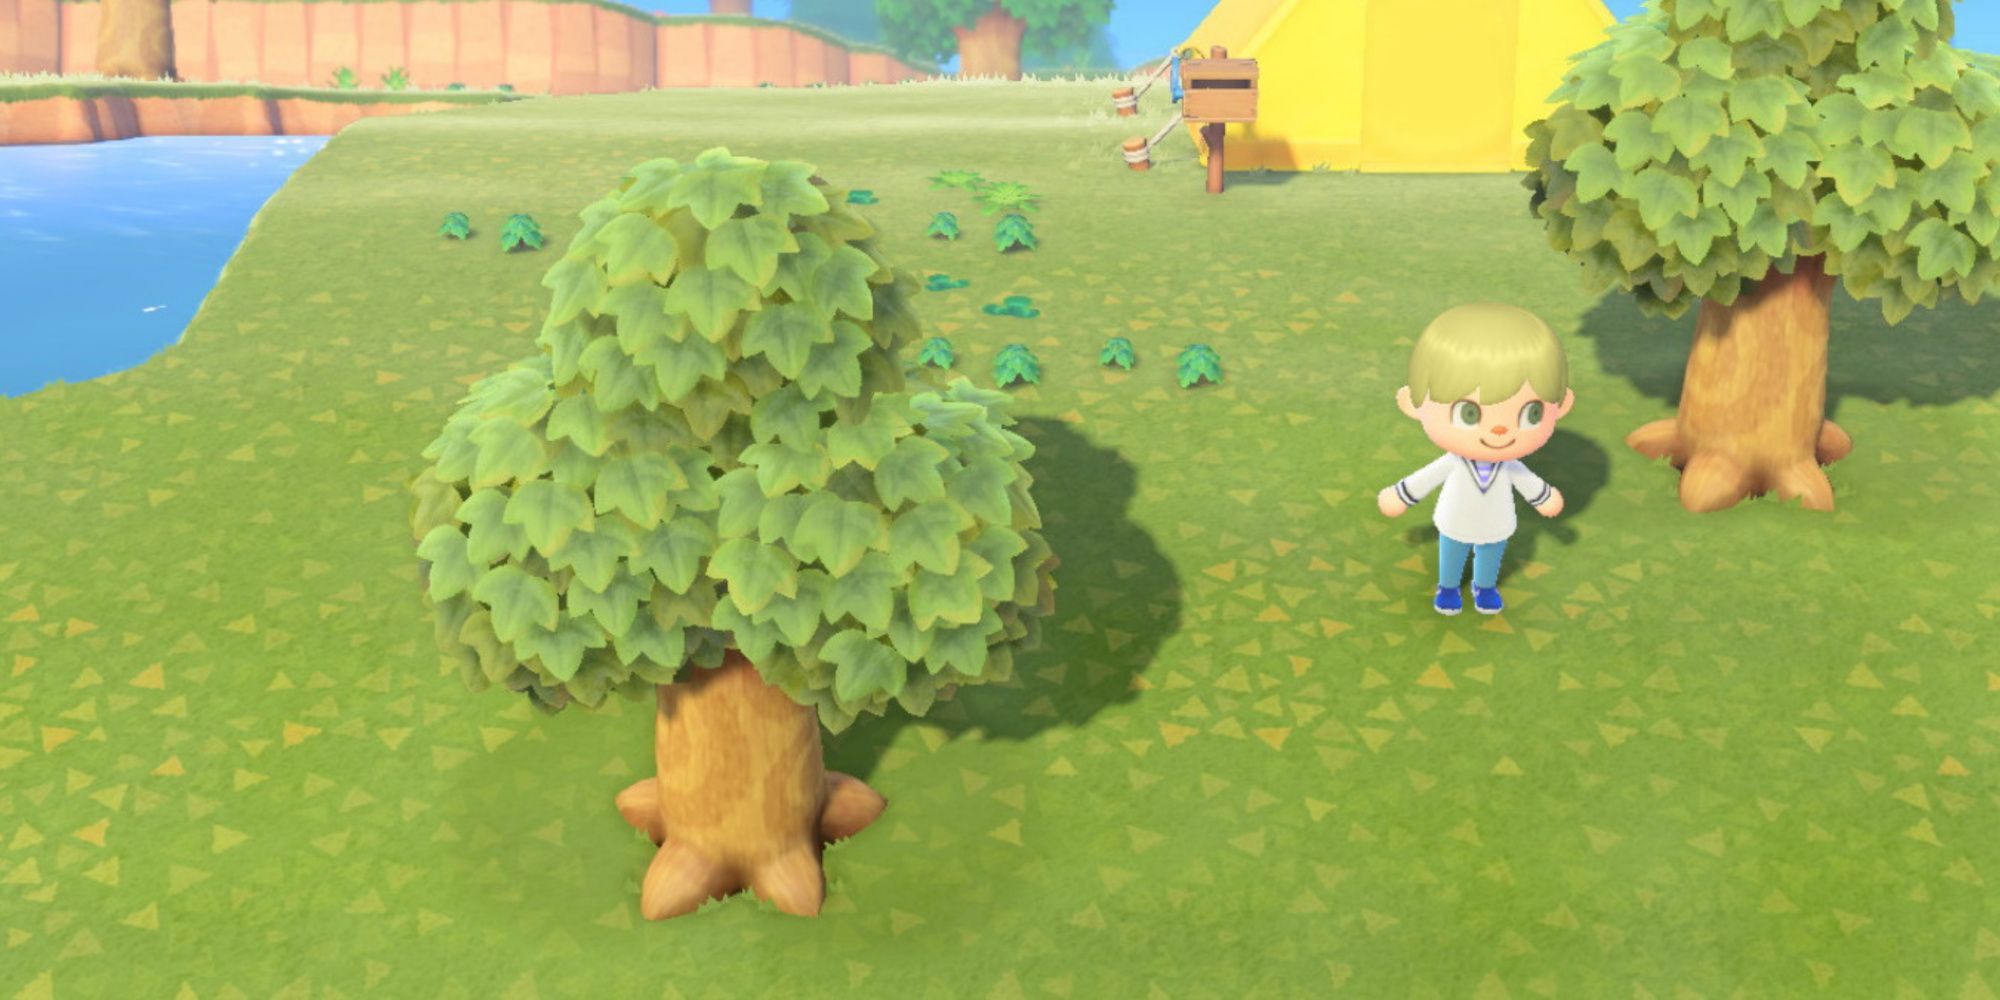 Exploring the island in Animal Crossing New Horizons